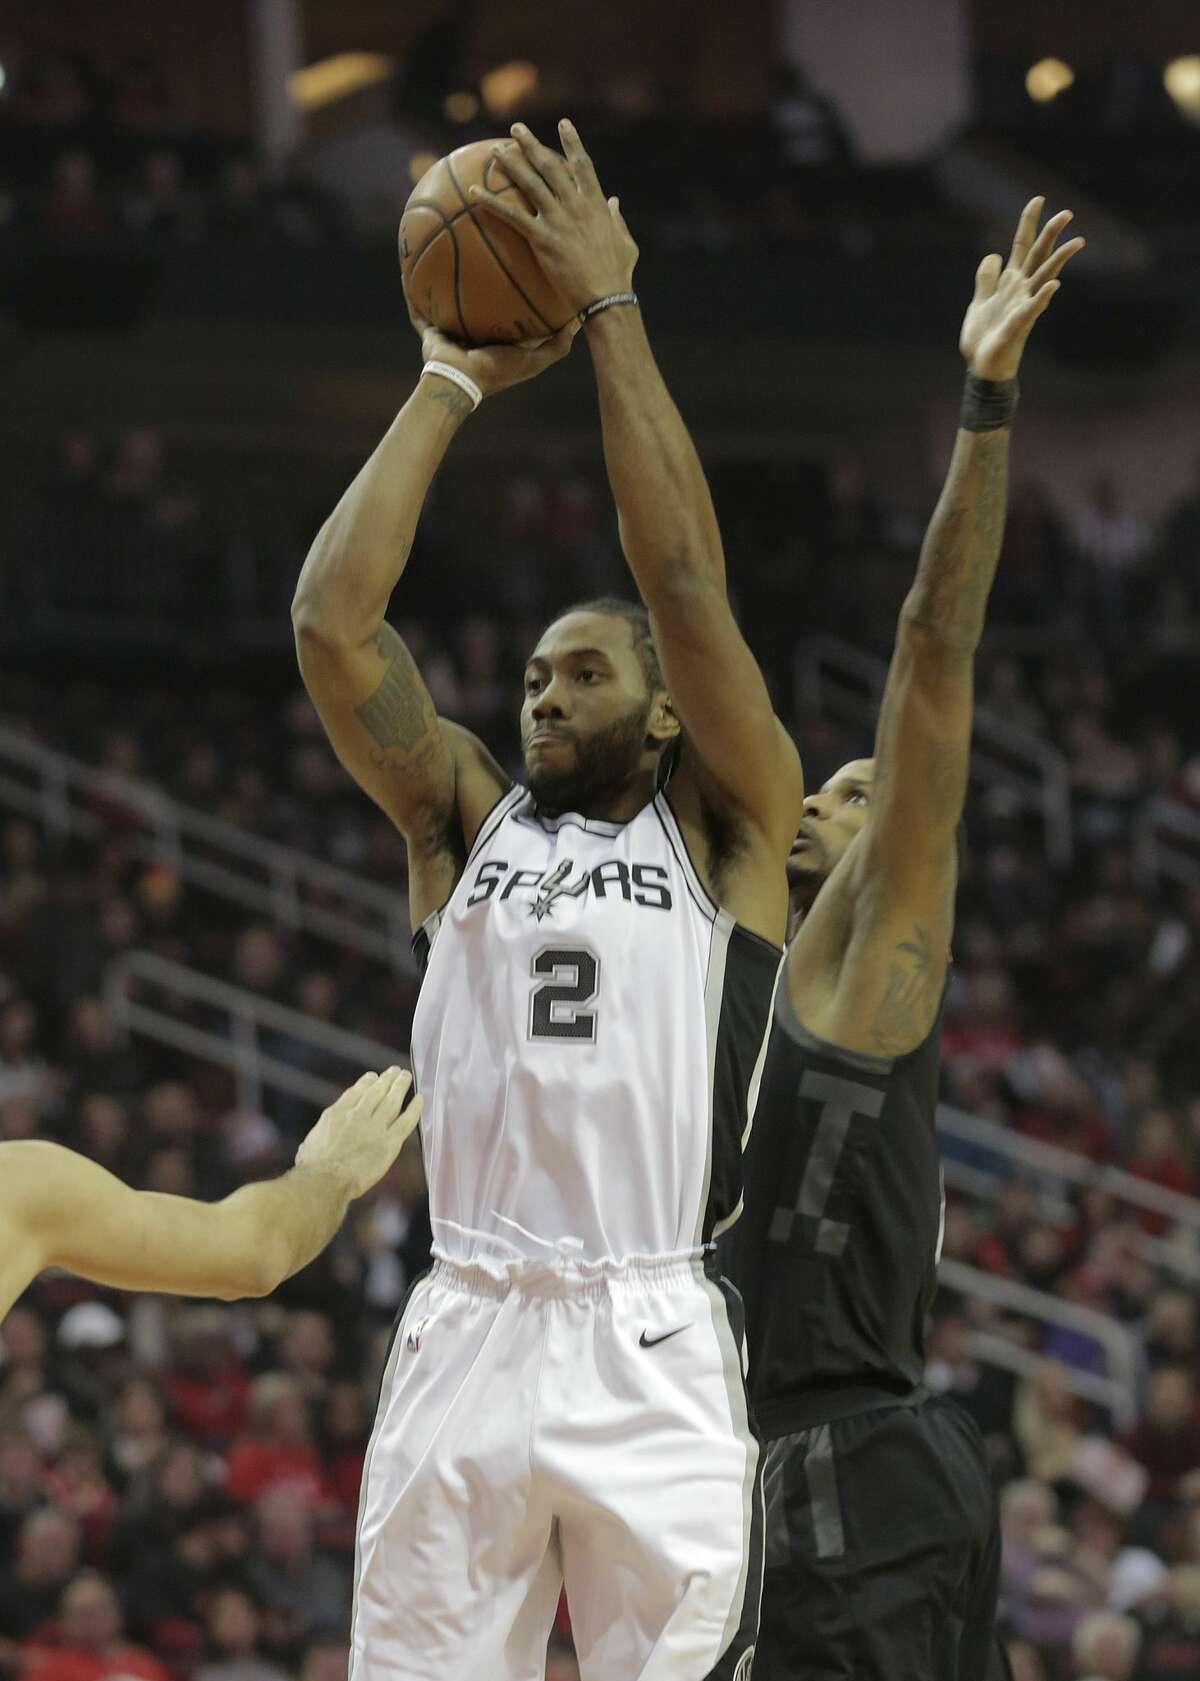 San Antonio Spurs forward Kawhi Leonard (2) puts up a shot against the Houston Rockets ain the first quarter at the Toyota Center on Friday, Dec. 15, 2017, in Houston. ( Elizabeth Conley / Houston Chronicle )